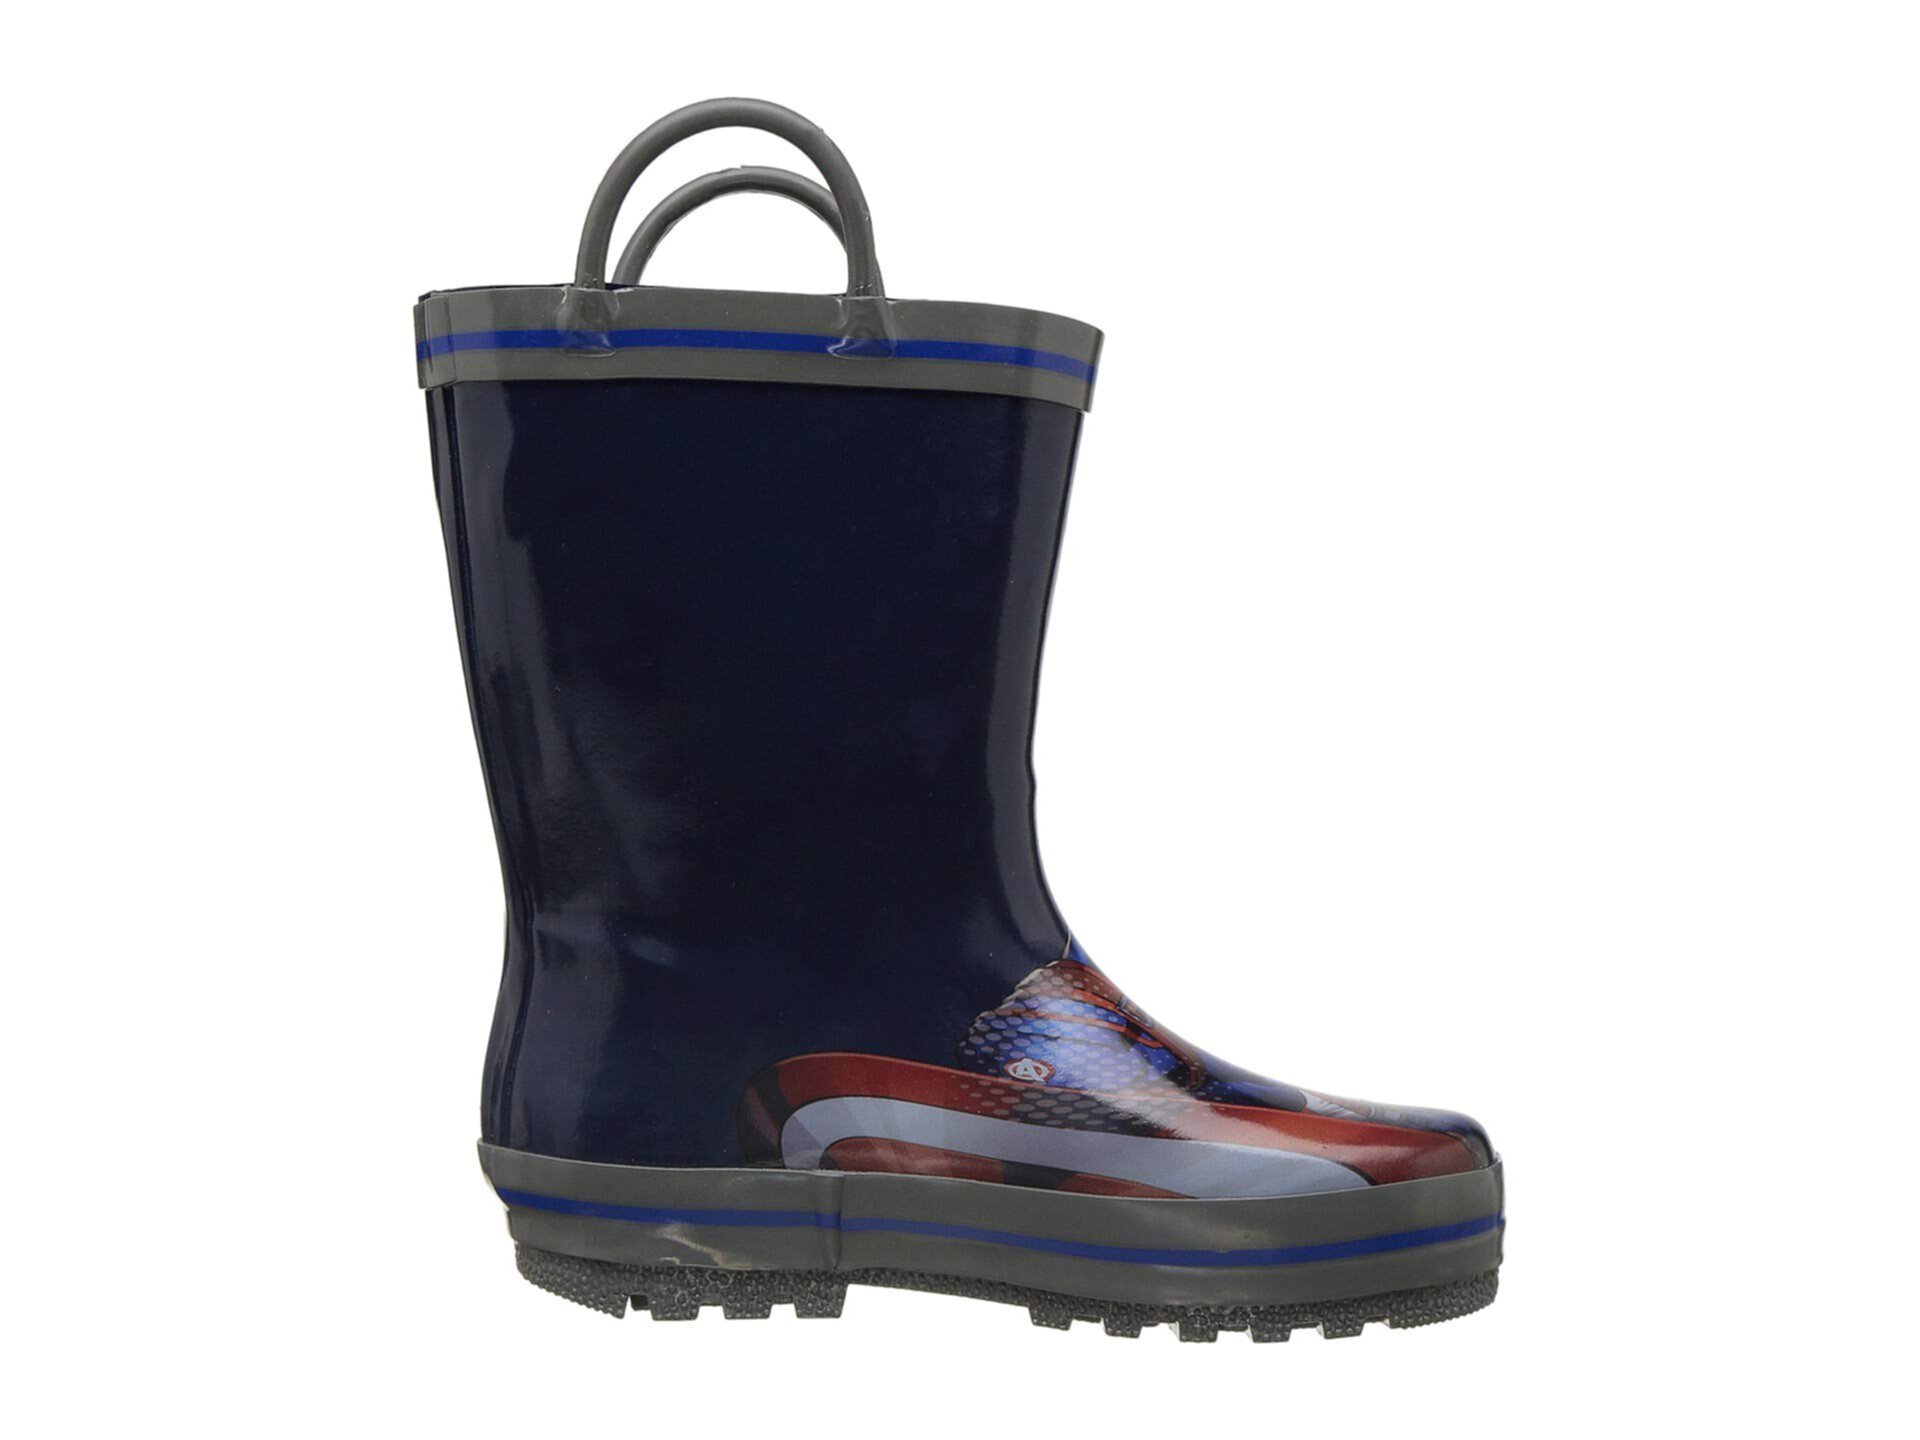 Avengers ™ Rain Boot (Малыш / Малыш) Favorite Characters